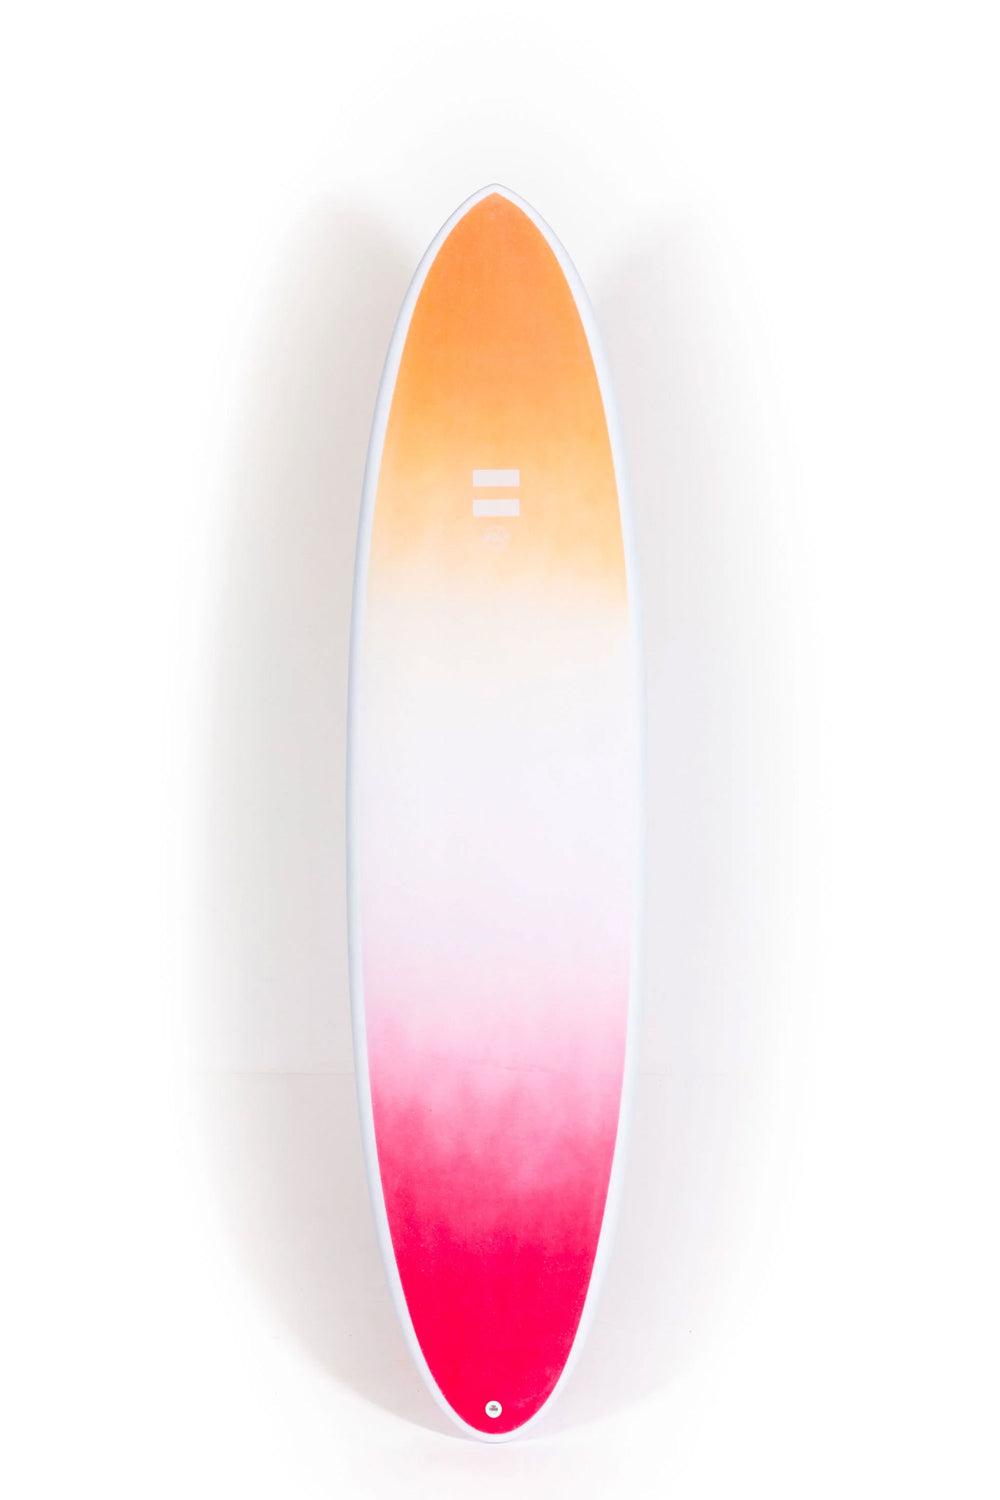 Pukas Surf Shop - Indio Surfboards - THE EGG Space - 7'10